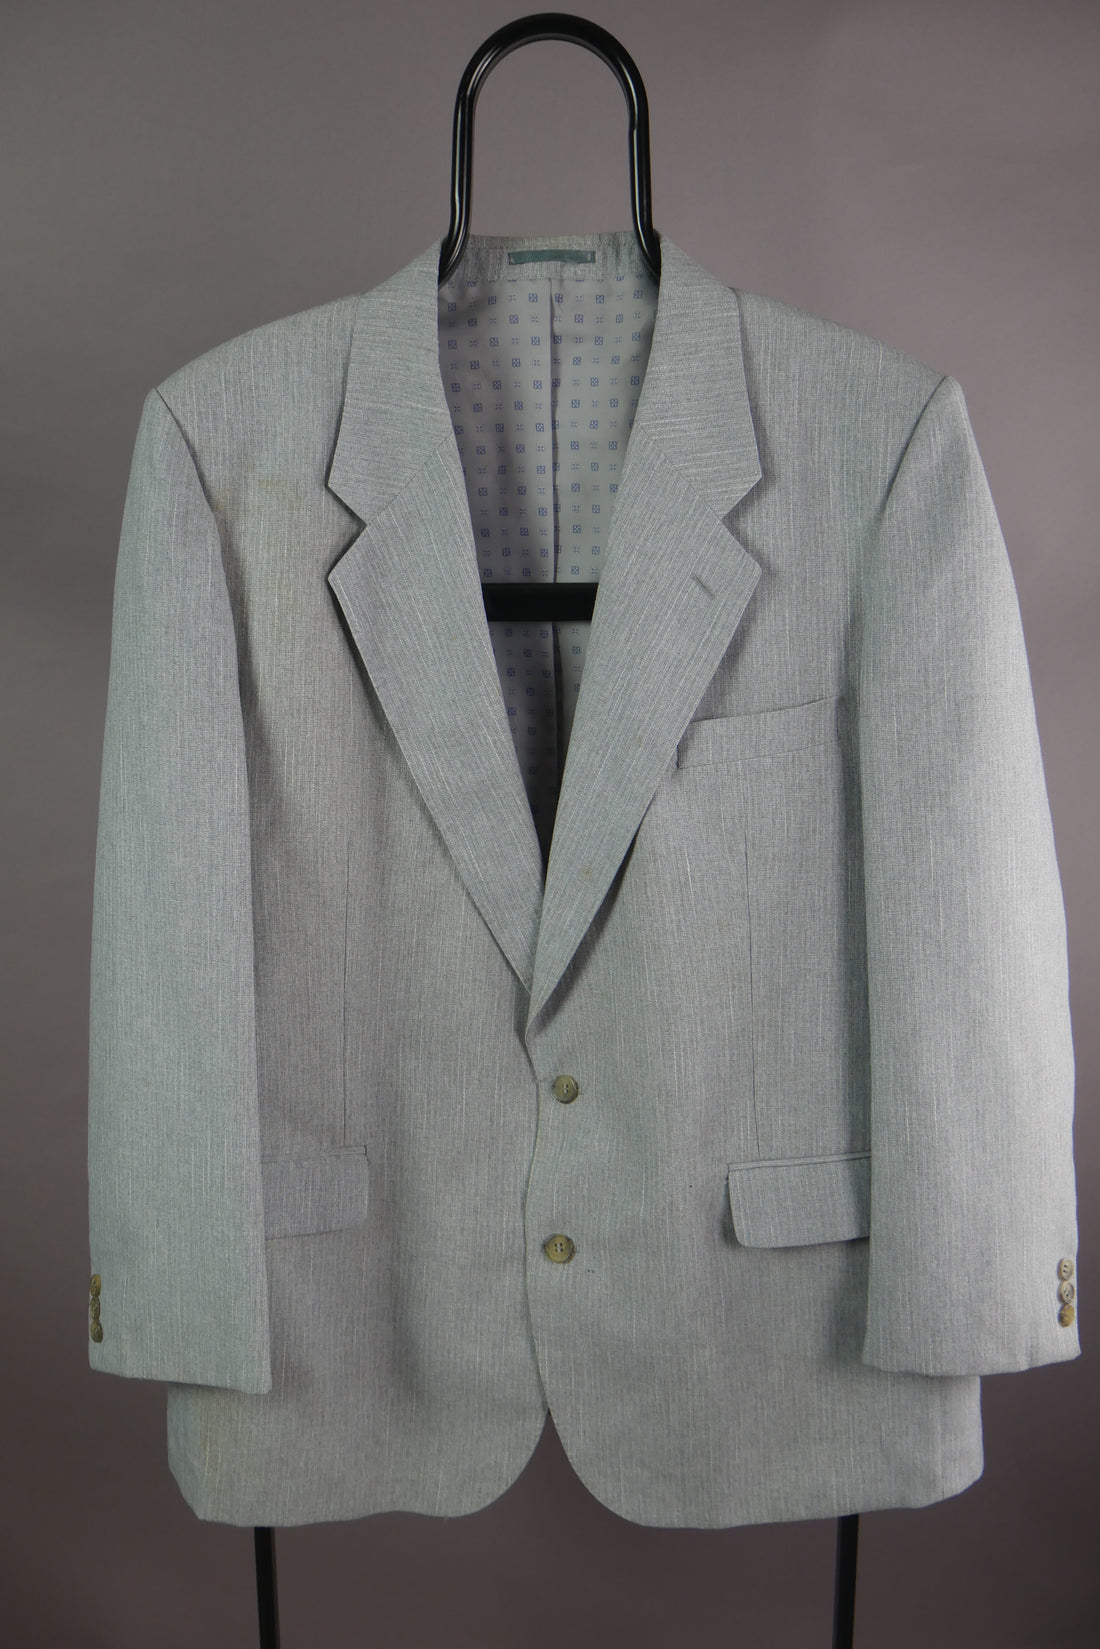 The Classic Vintage Houndstooth Suit Jacket (44)